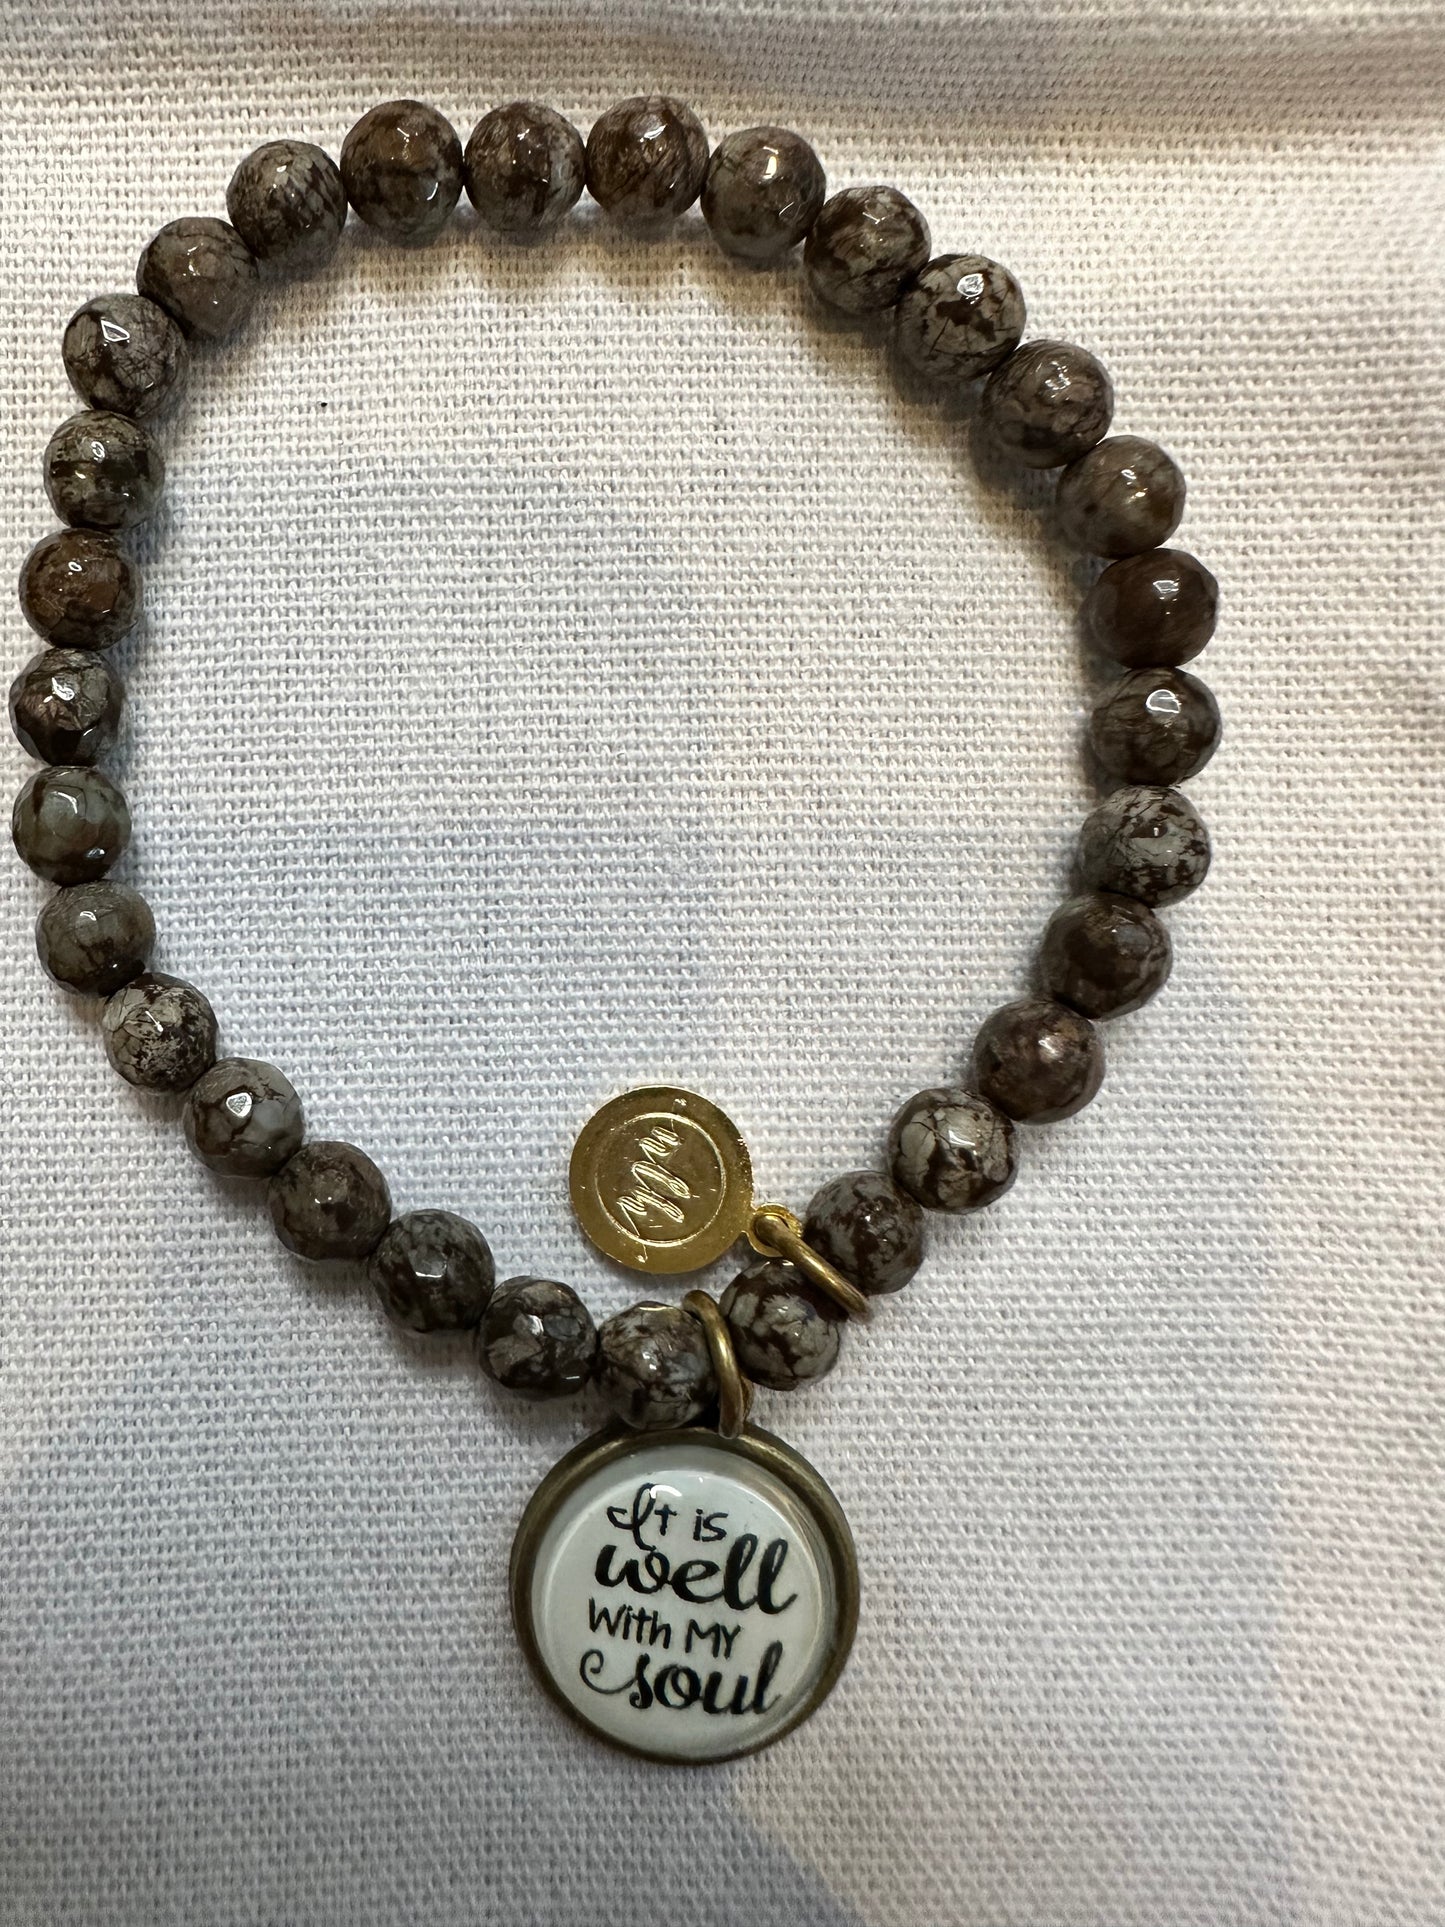 Sentiment Bracelet- It is well with my soul